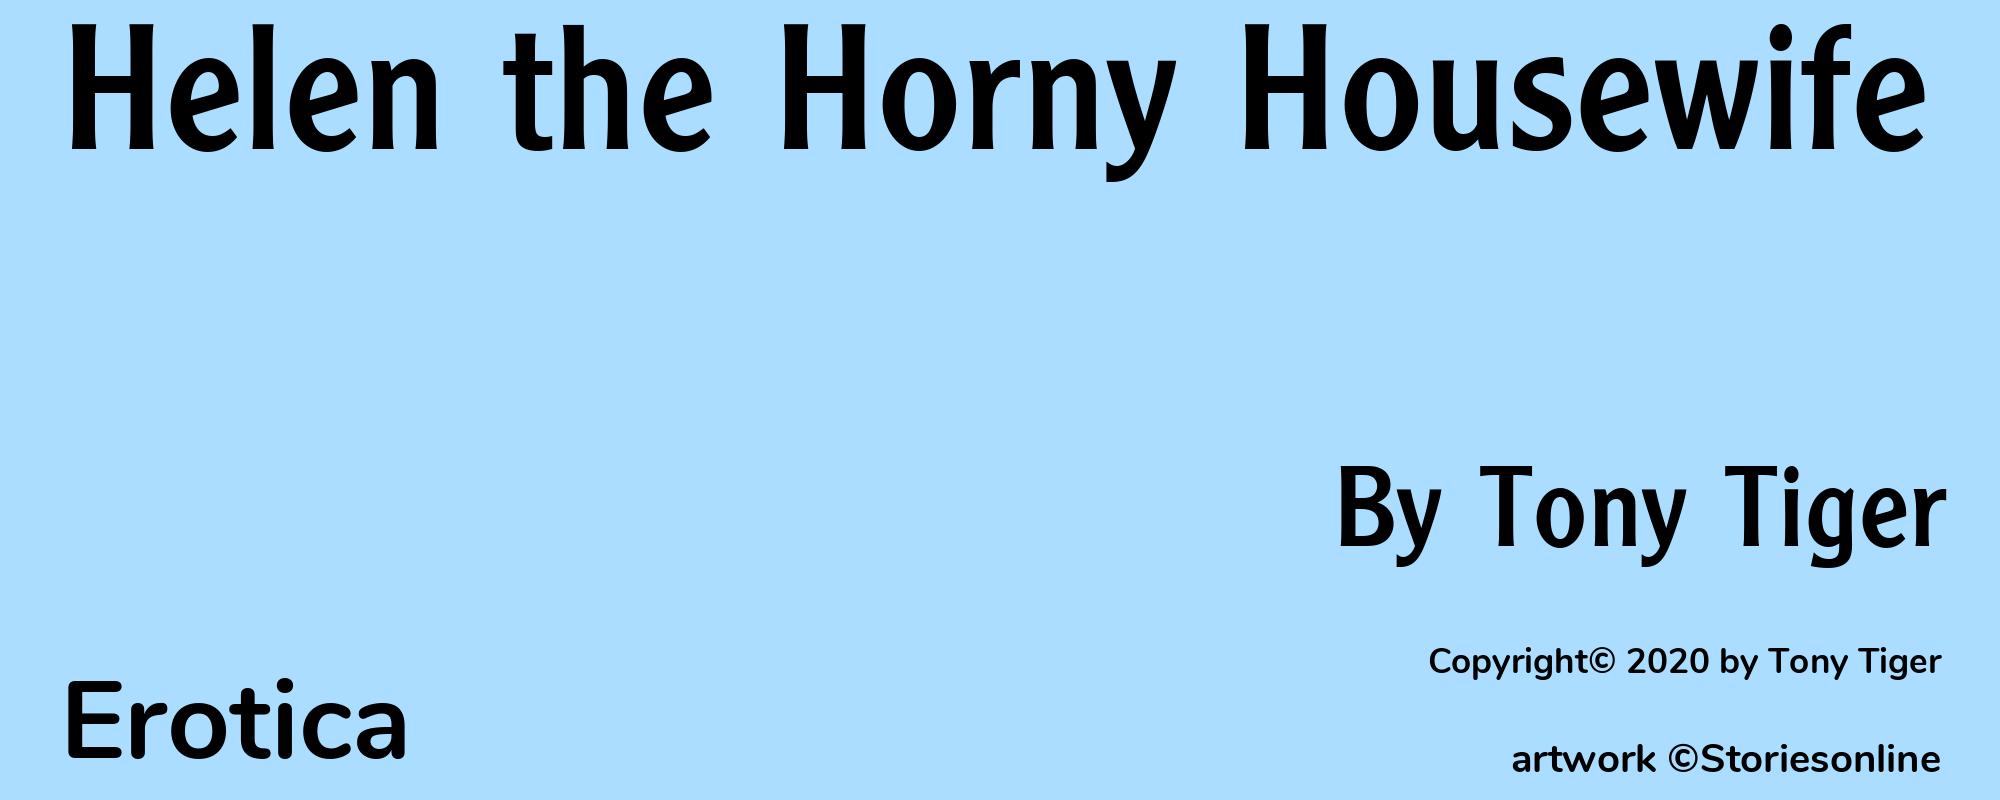 Helen the Horny Housewife - Cover